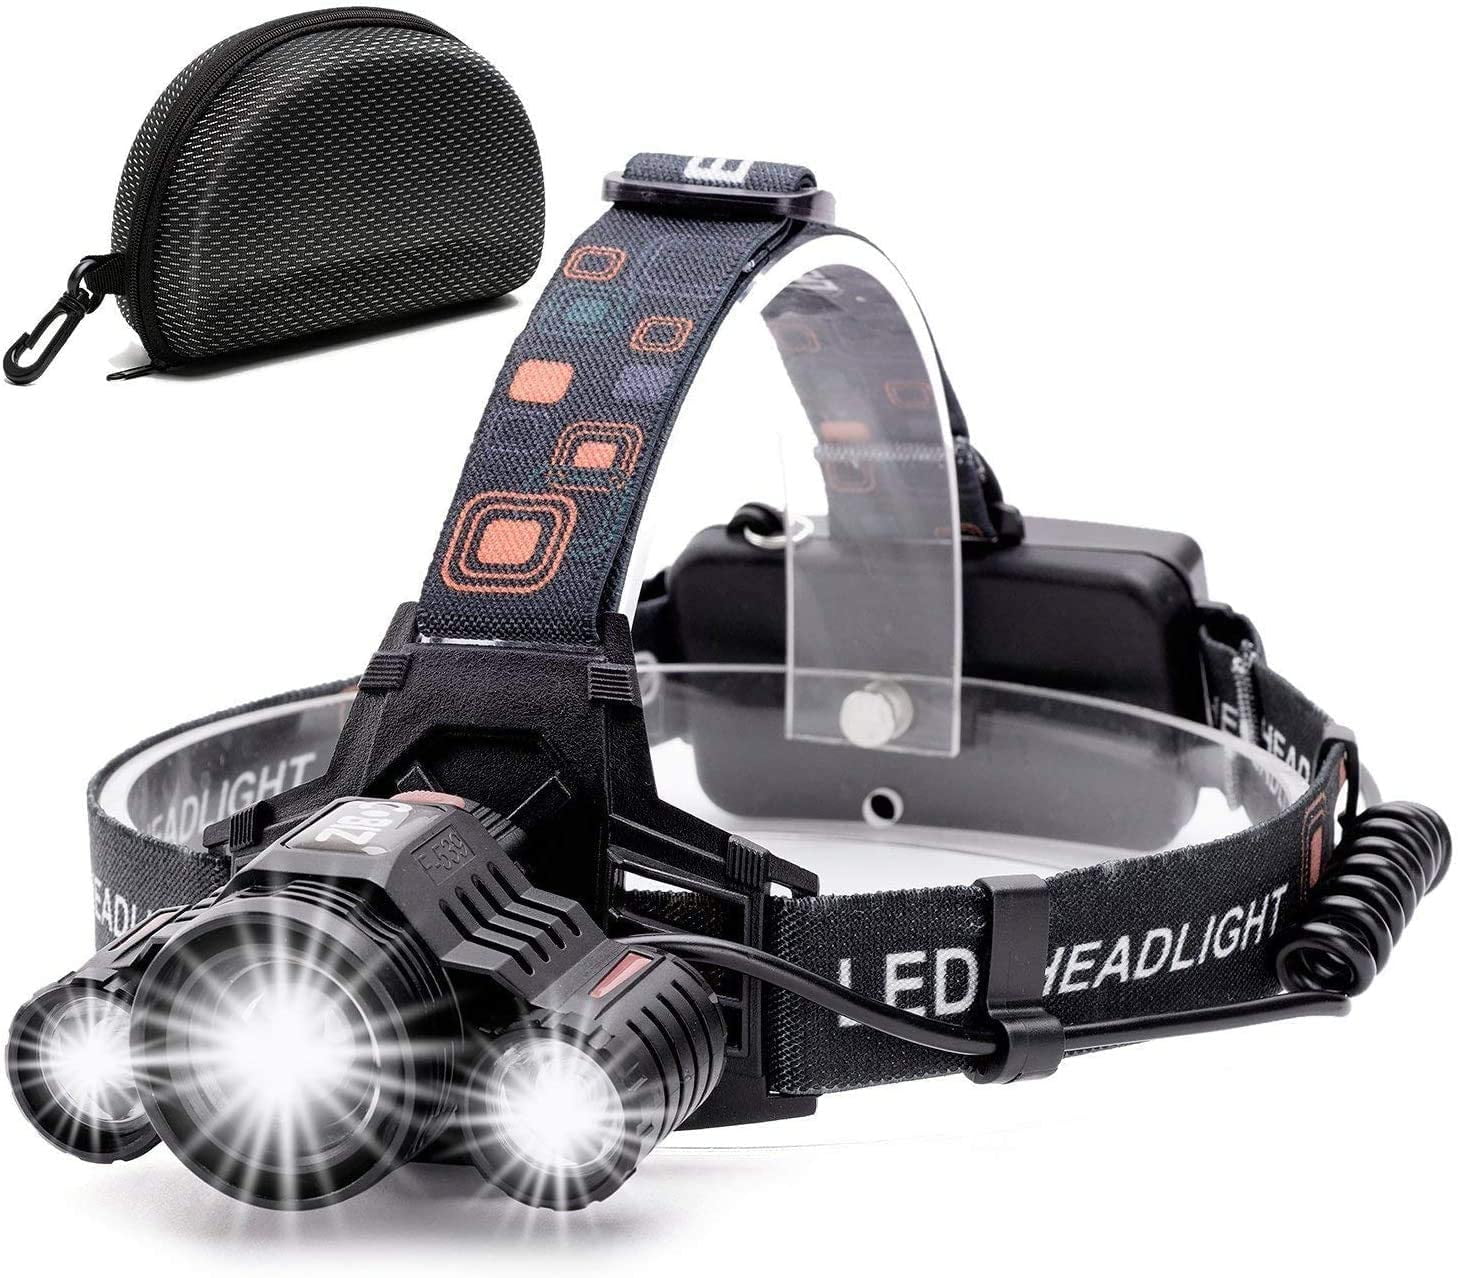 Rechargeable LED Headlamp, 10000 Lumen Powerful Torch Light 4 Modes 3 LED  CREE XML-T6 Zoomable Waterproof Head Torch with USB Cable and 2 Batteries  Camping Fishing Hunting - Walmart.com